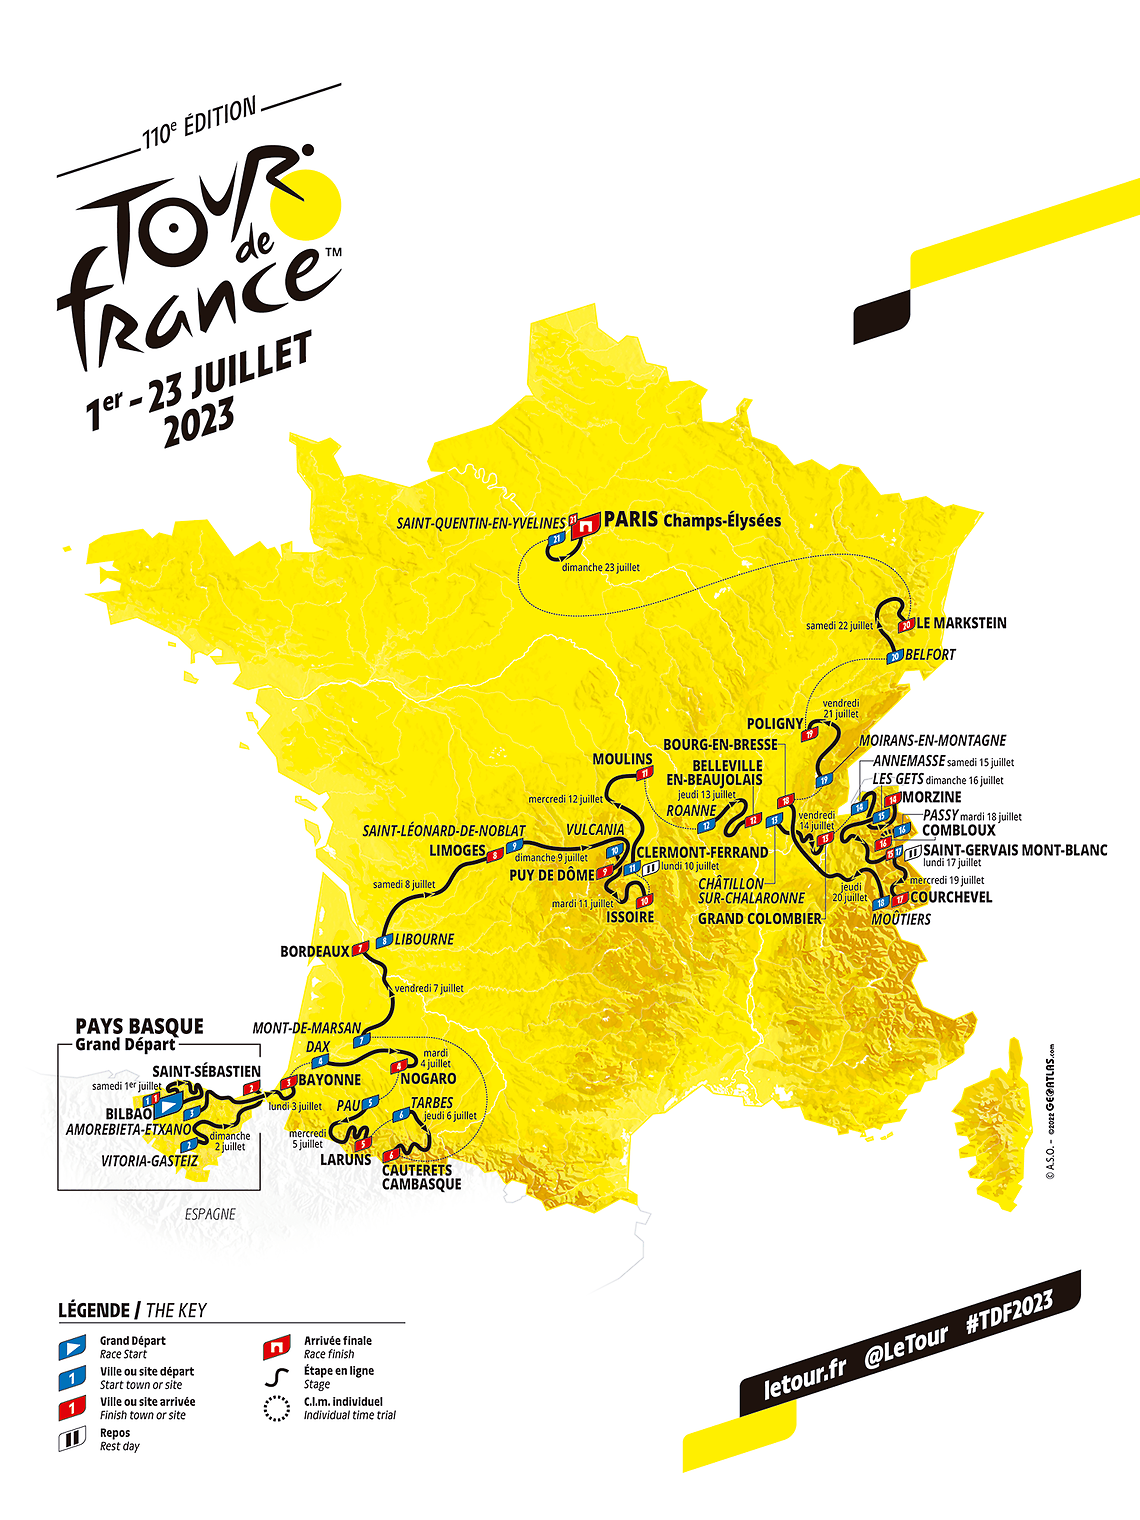 This map shows the route of the 2022 edition of the Tour de France